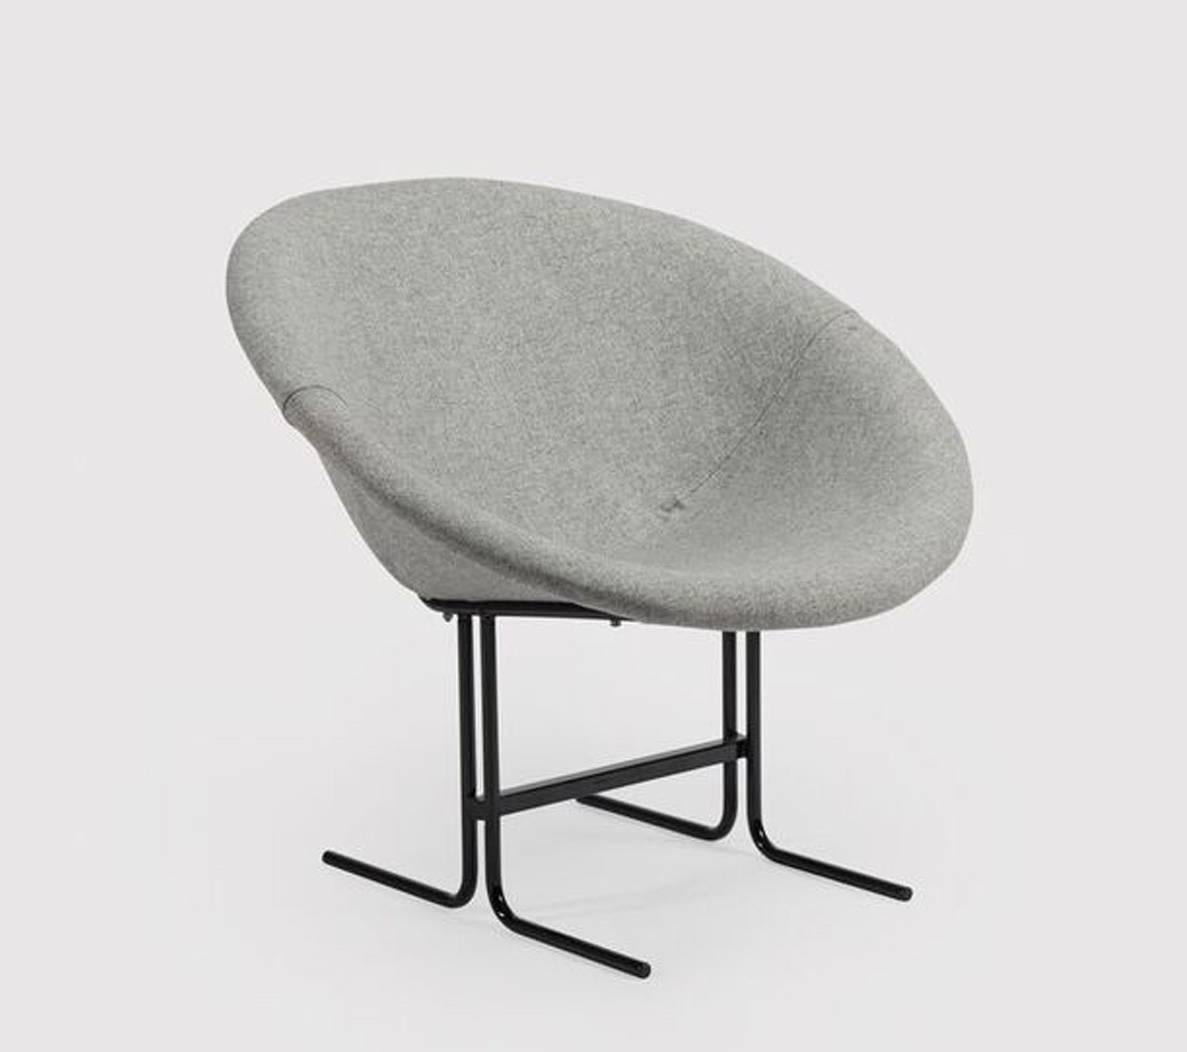 Single hoop chair with black lacquered metal frame and new Kvadrat upholstery.
Minimal, simple line, very comfortable.